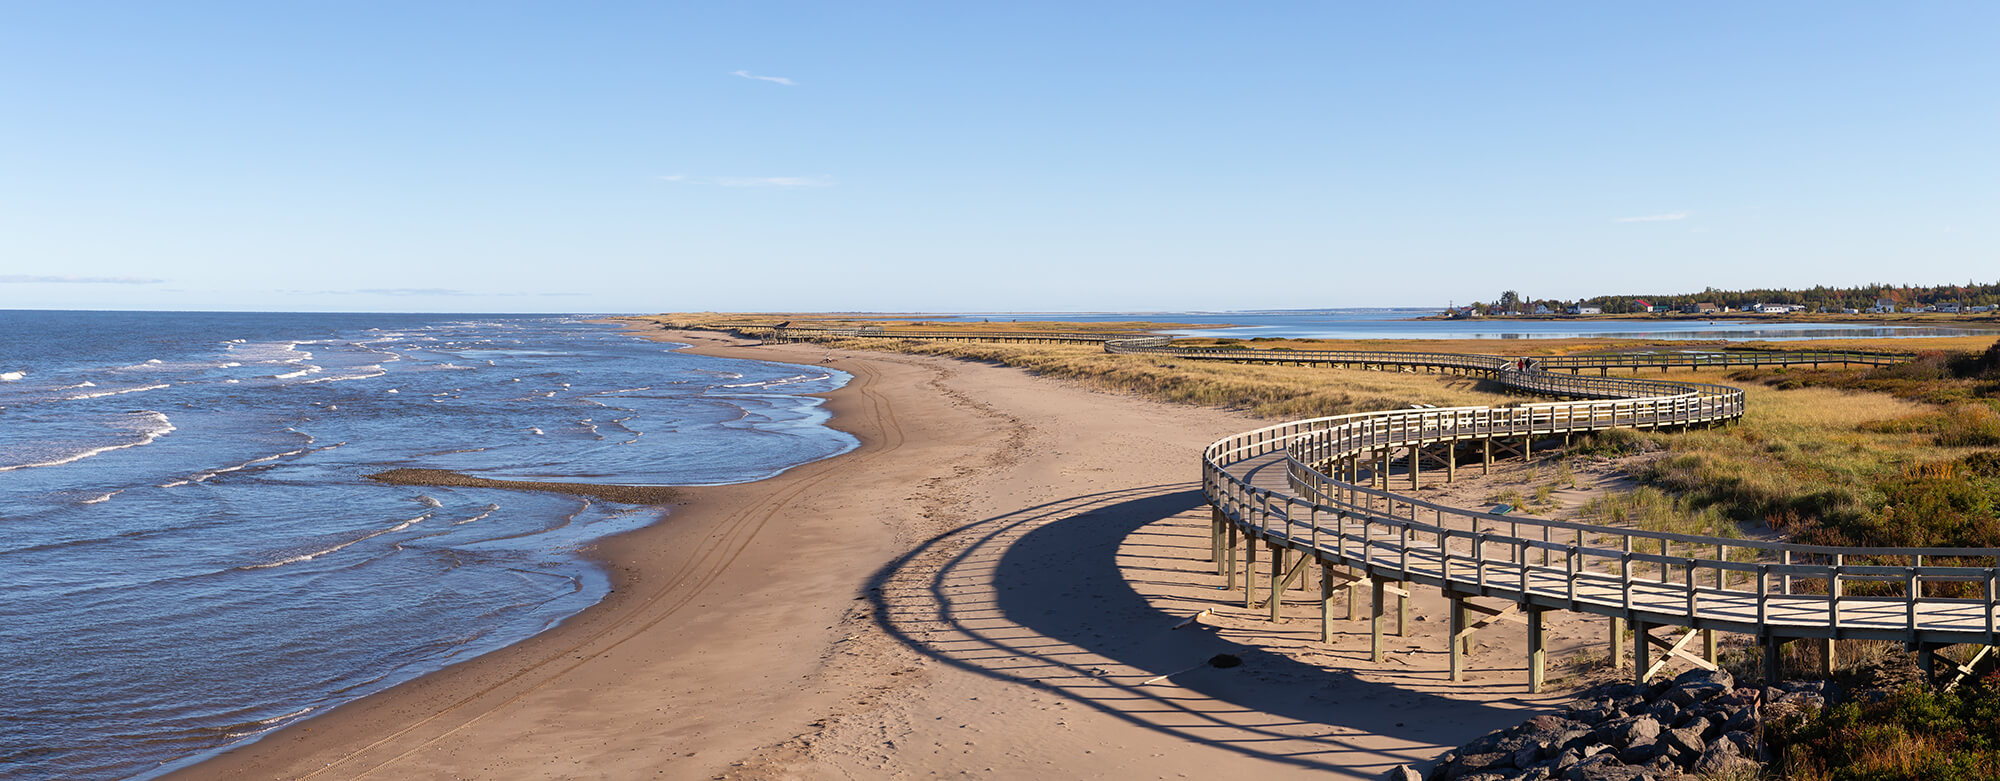 Panoramic view of a sandy beach in New Brunswick